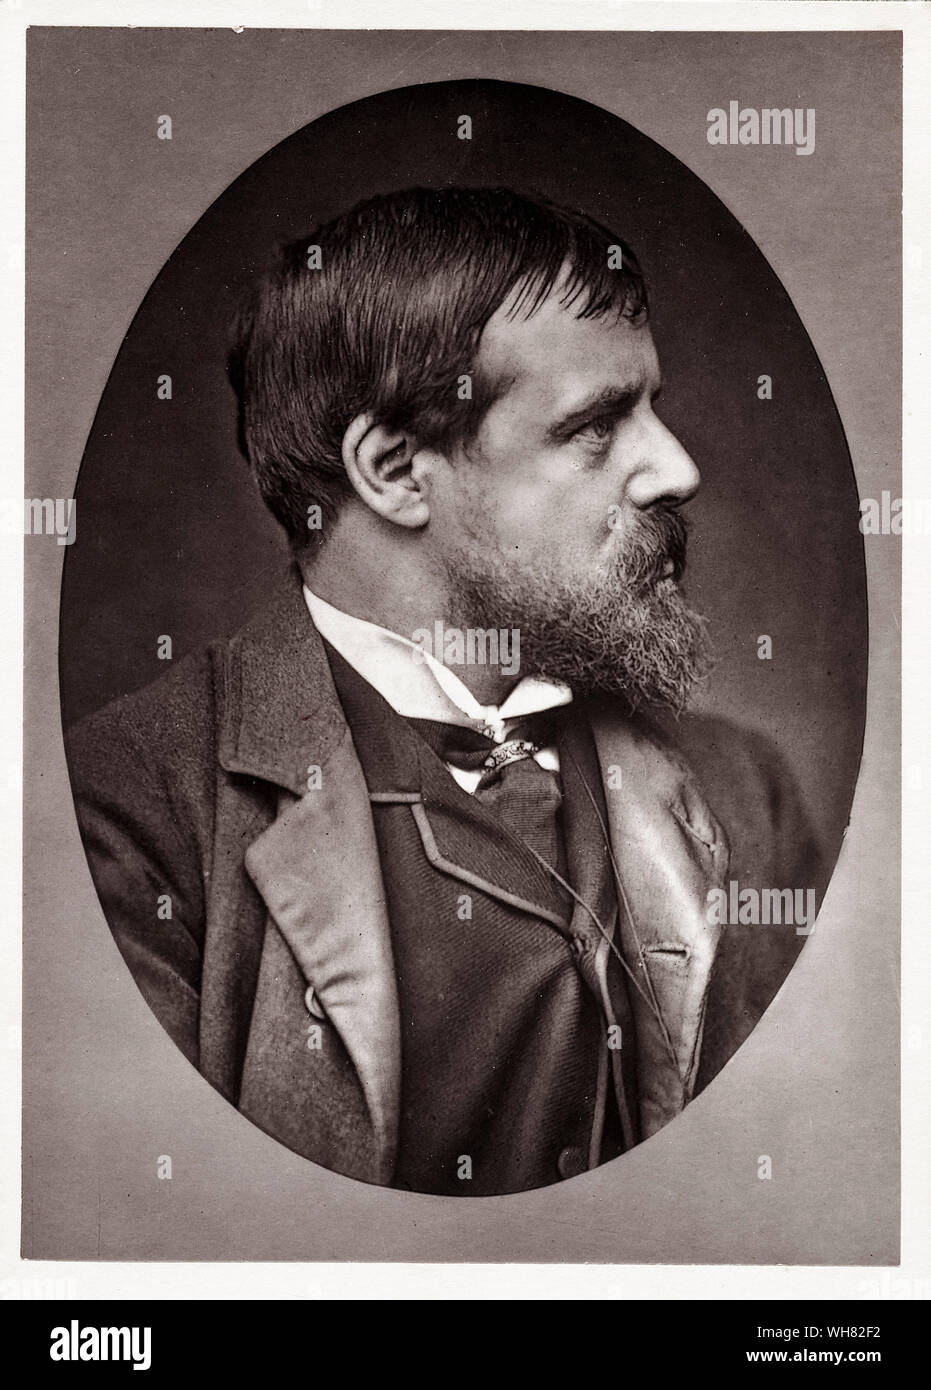 Sir Lawrence Alma Tadema, (1836-1912 ), Portrait photograph (side view), unknown photographer 1836-1912 Stock Photo